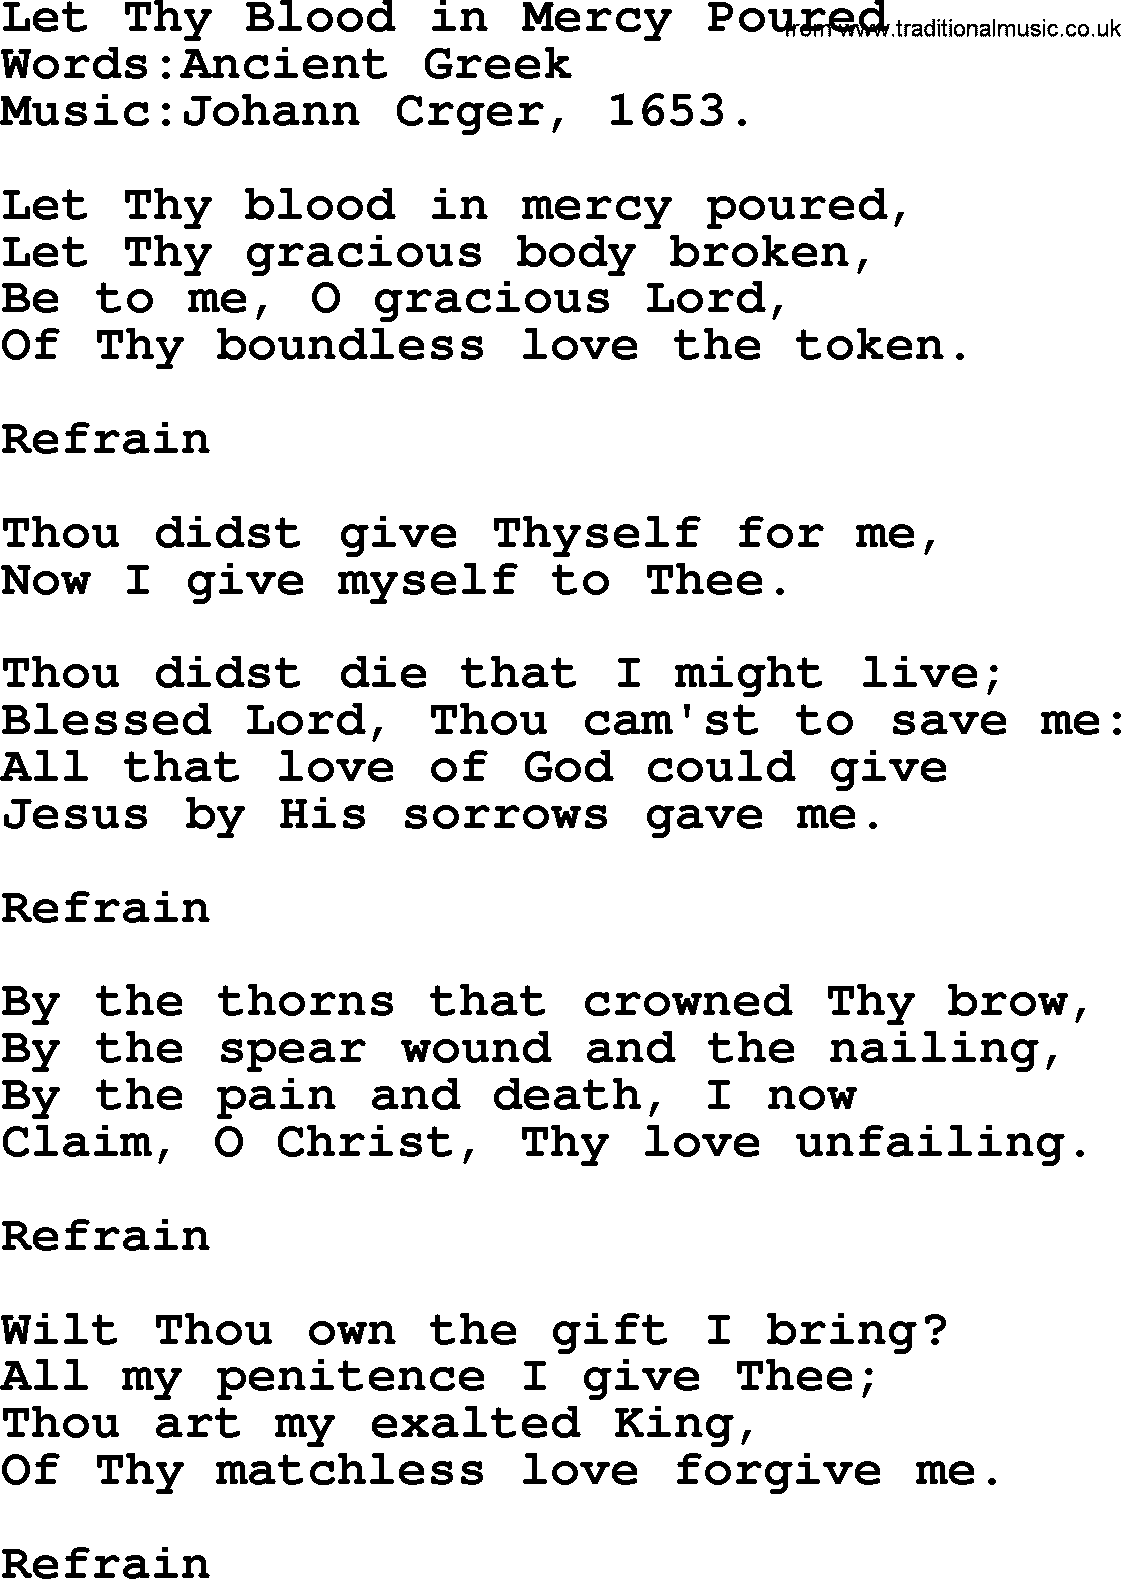 Christian hymns and song lyrics for Communion(The Eucharist): Let Thy Blood In Mercy Poured, lyrics with PDF